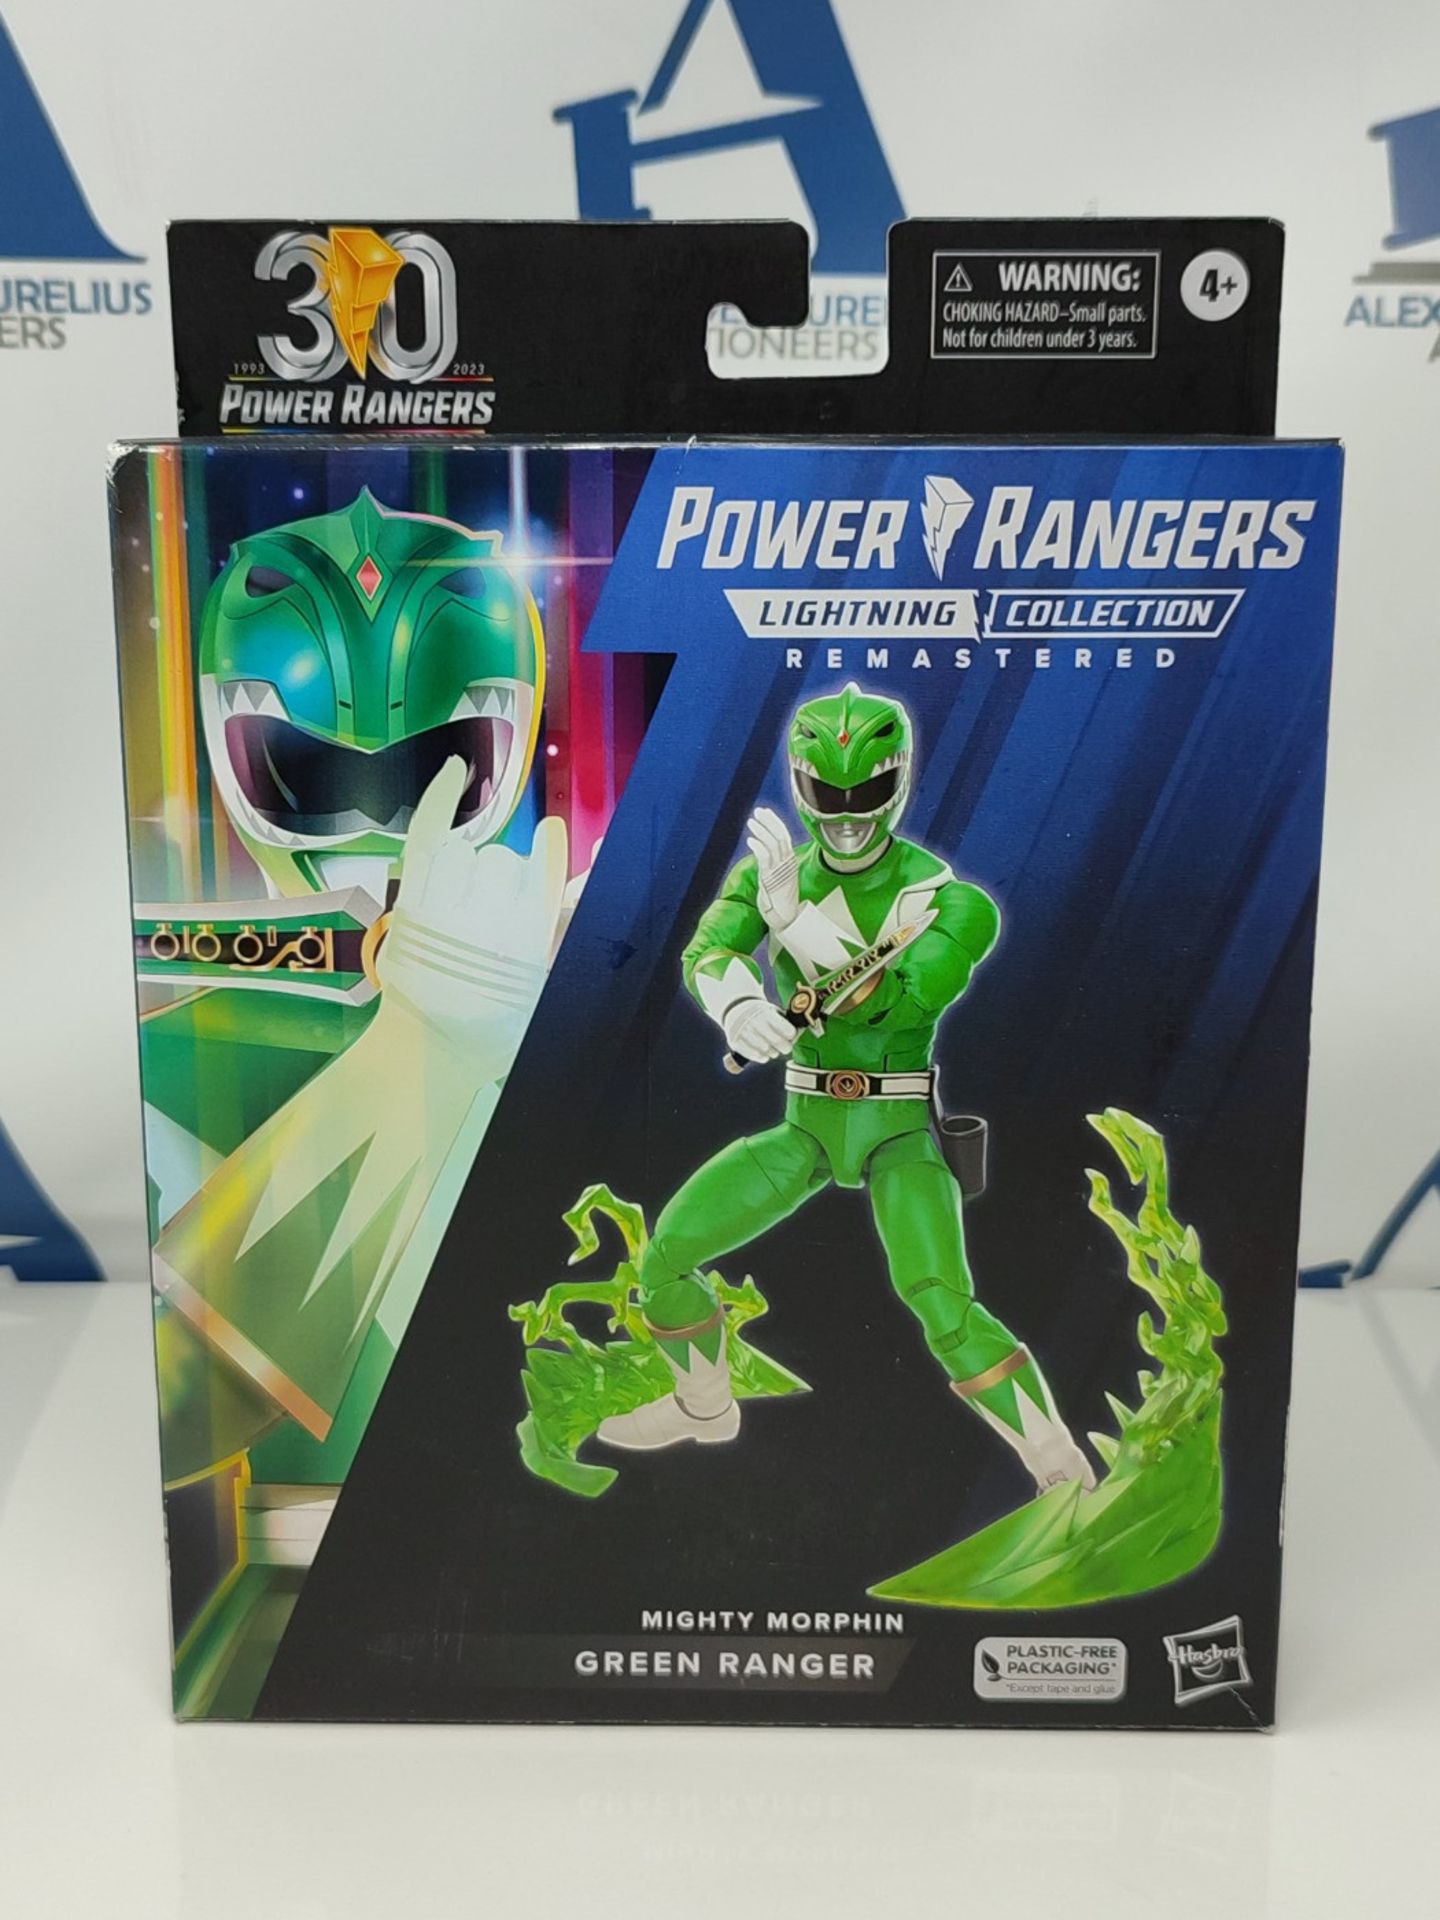 Power Rangers Lightning Collection Remastered Mighty Morphin Green Ranger 6" Action Fi - Image 2 of 3